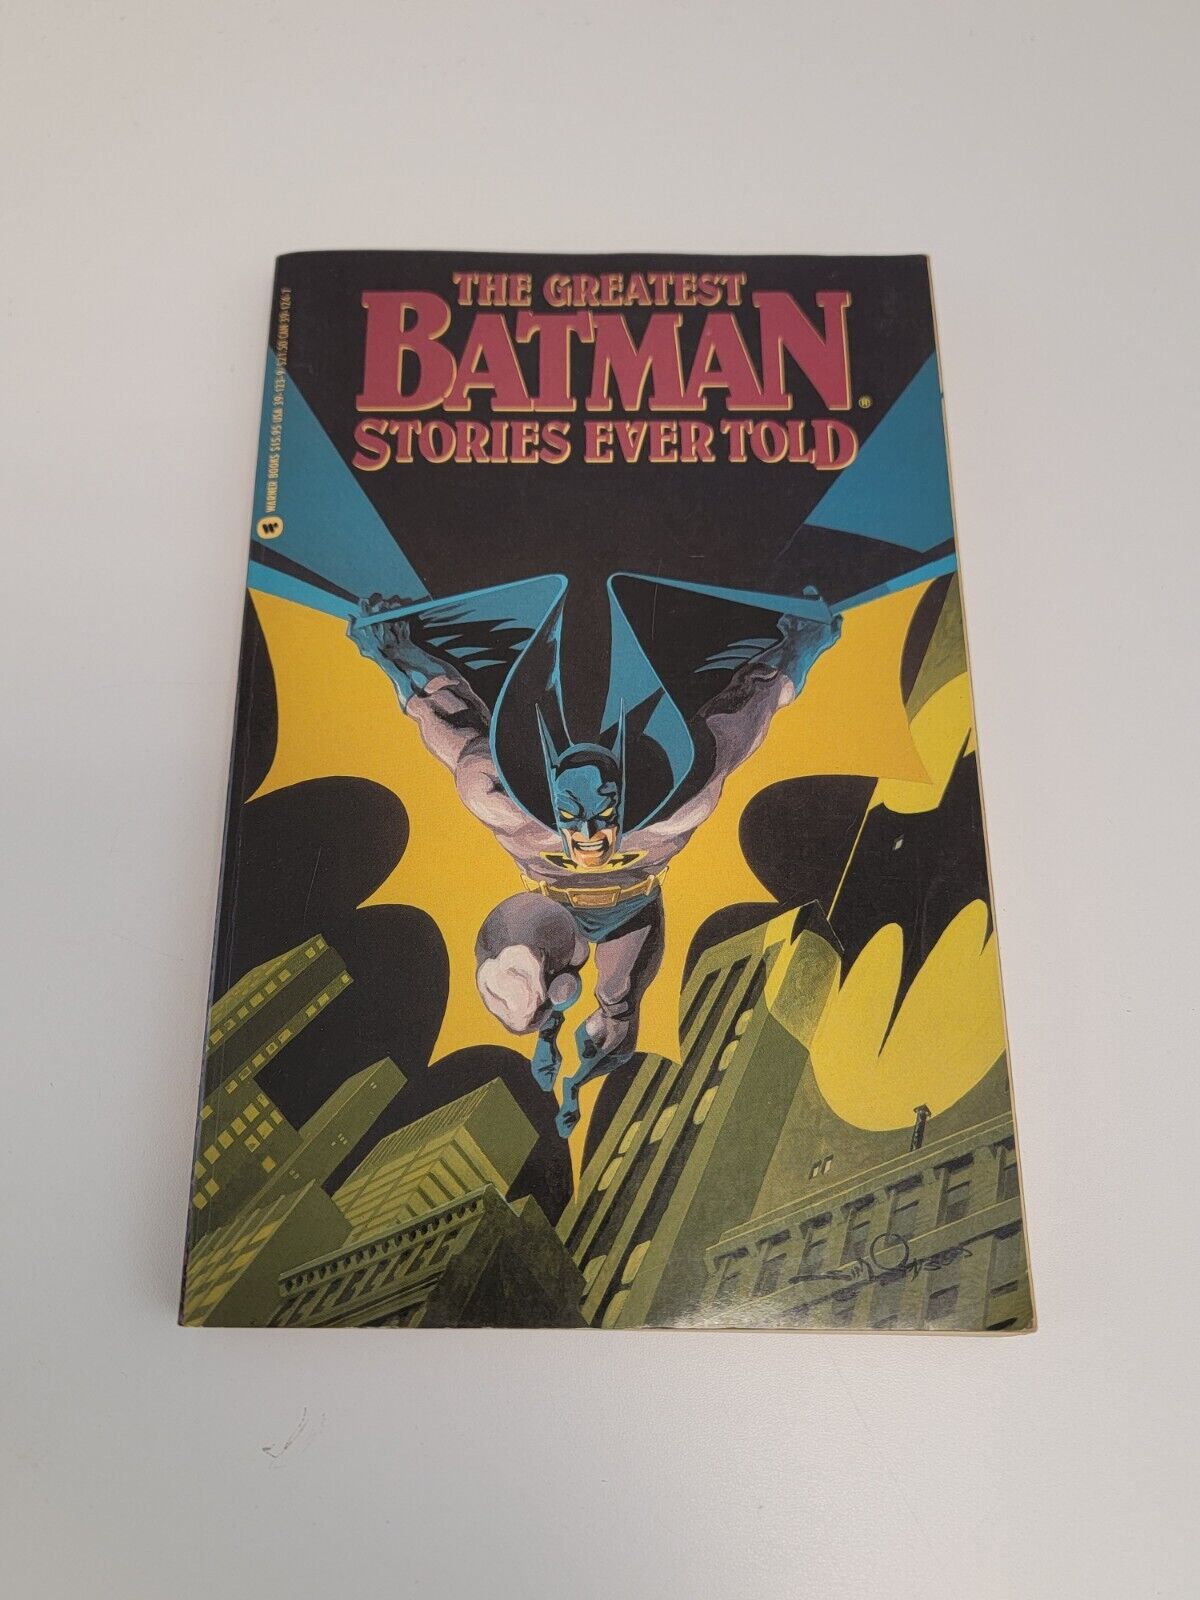 The Greatest Batman Stories Ever Told - Paperback By DC Comics - GOOD COND.